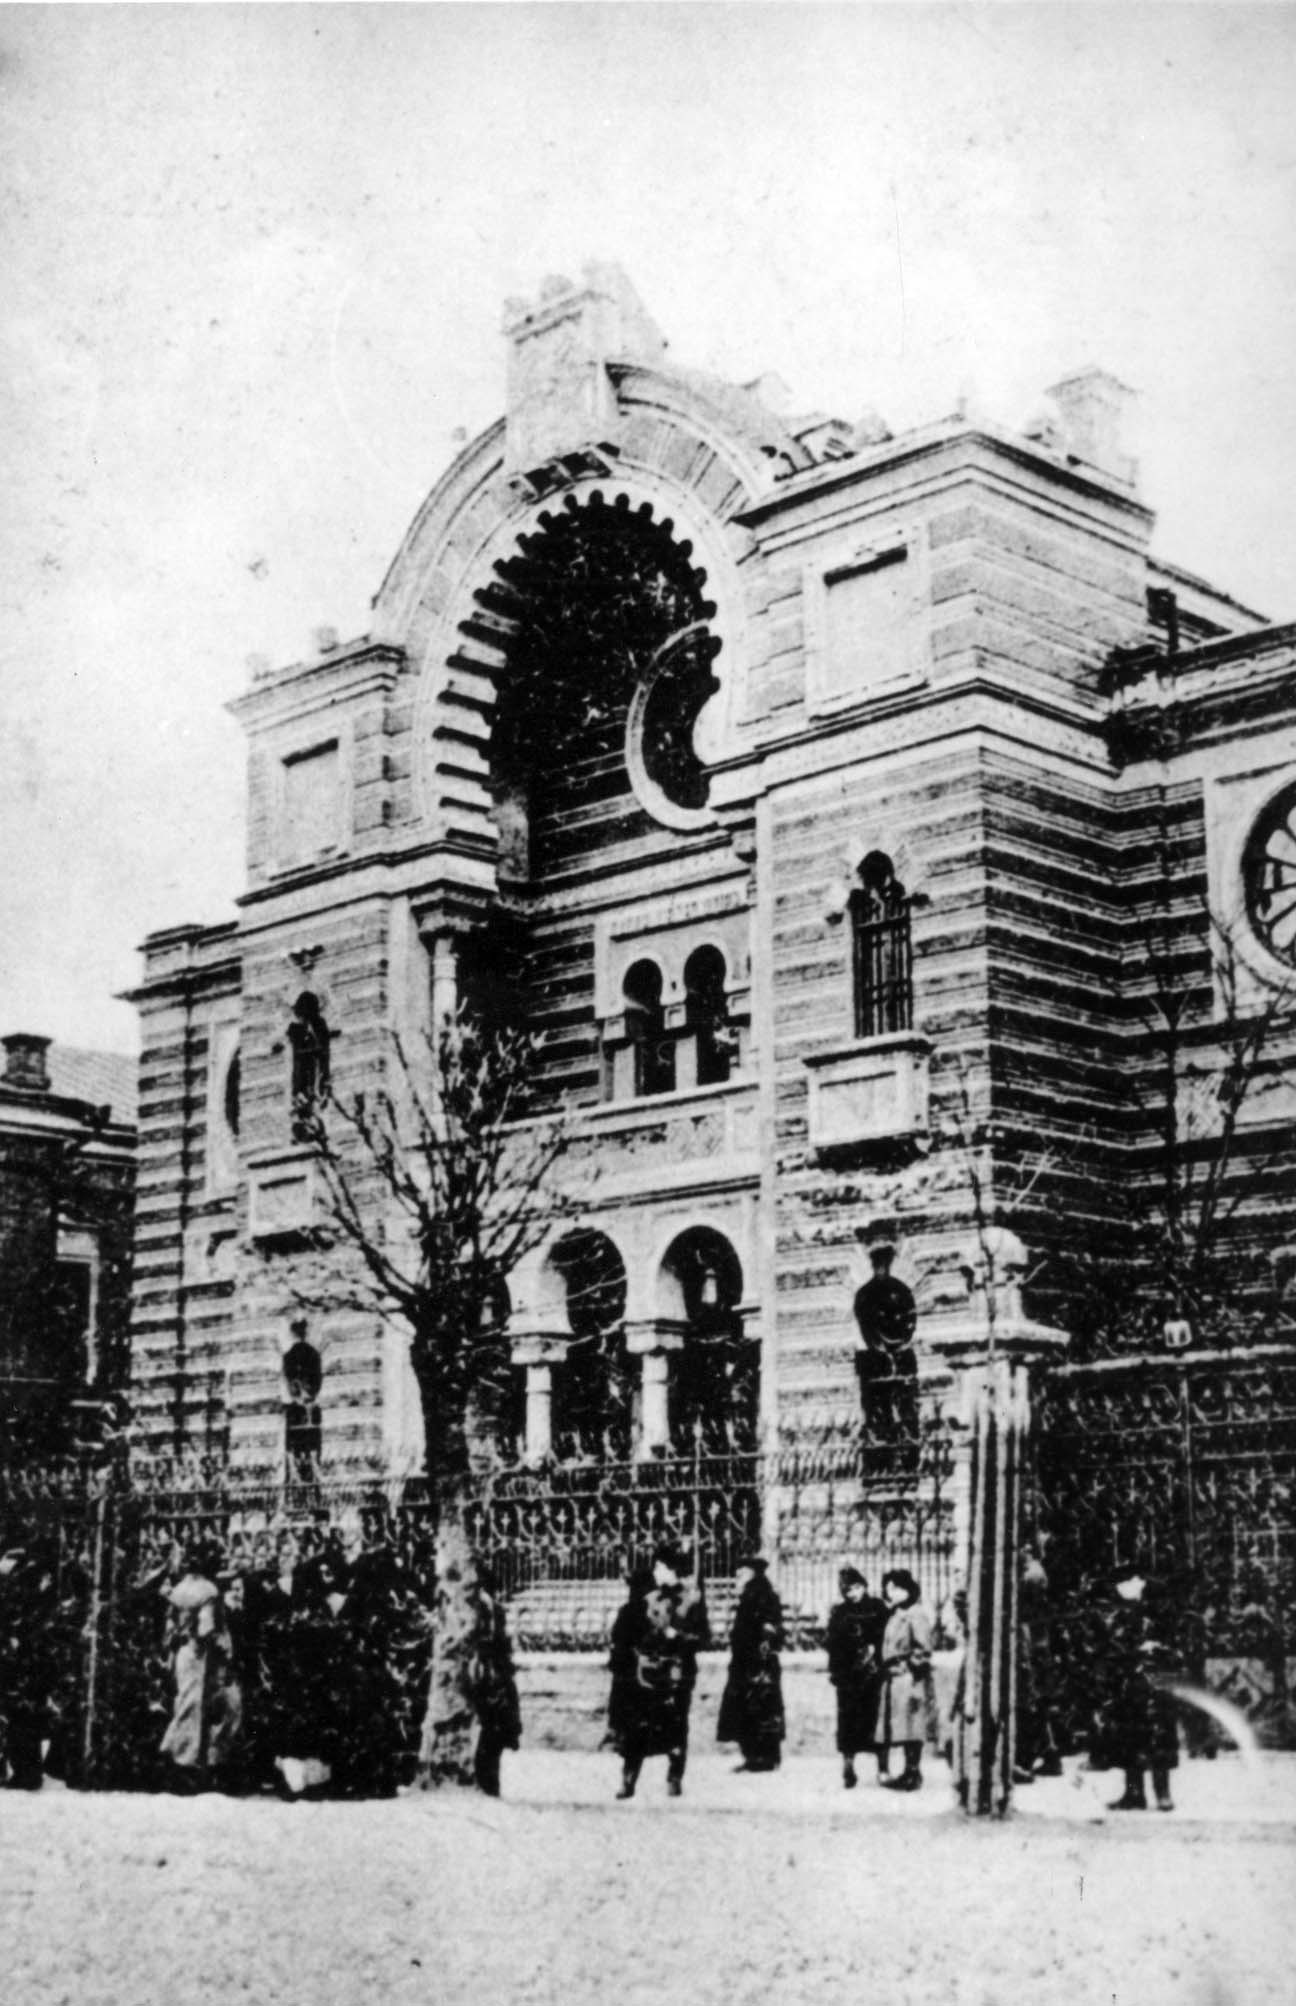 The Minsk Choral Synagogue, which housed the Belarusian State Jewish Theater in the interwar period